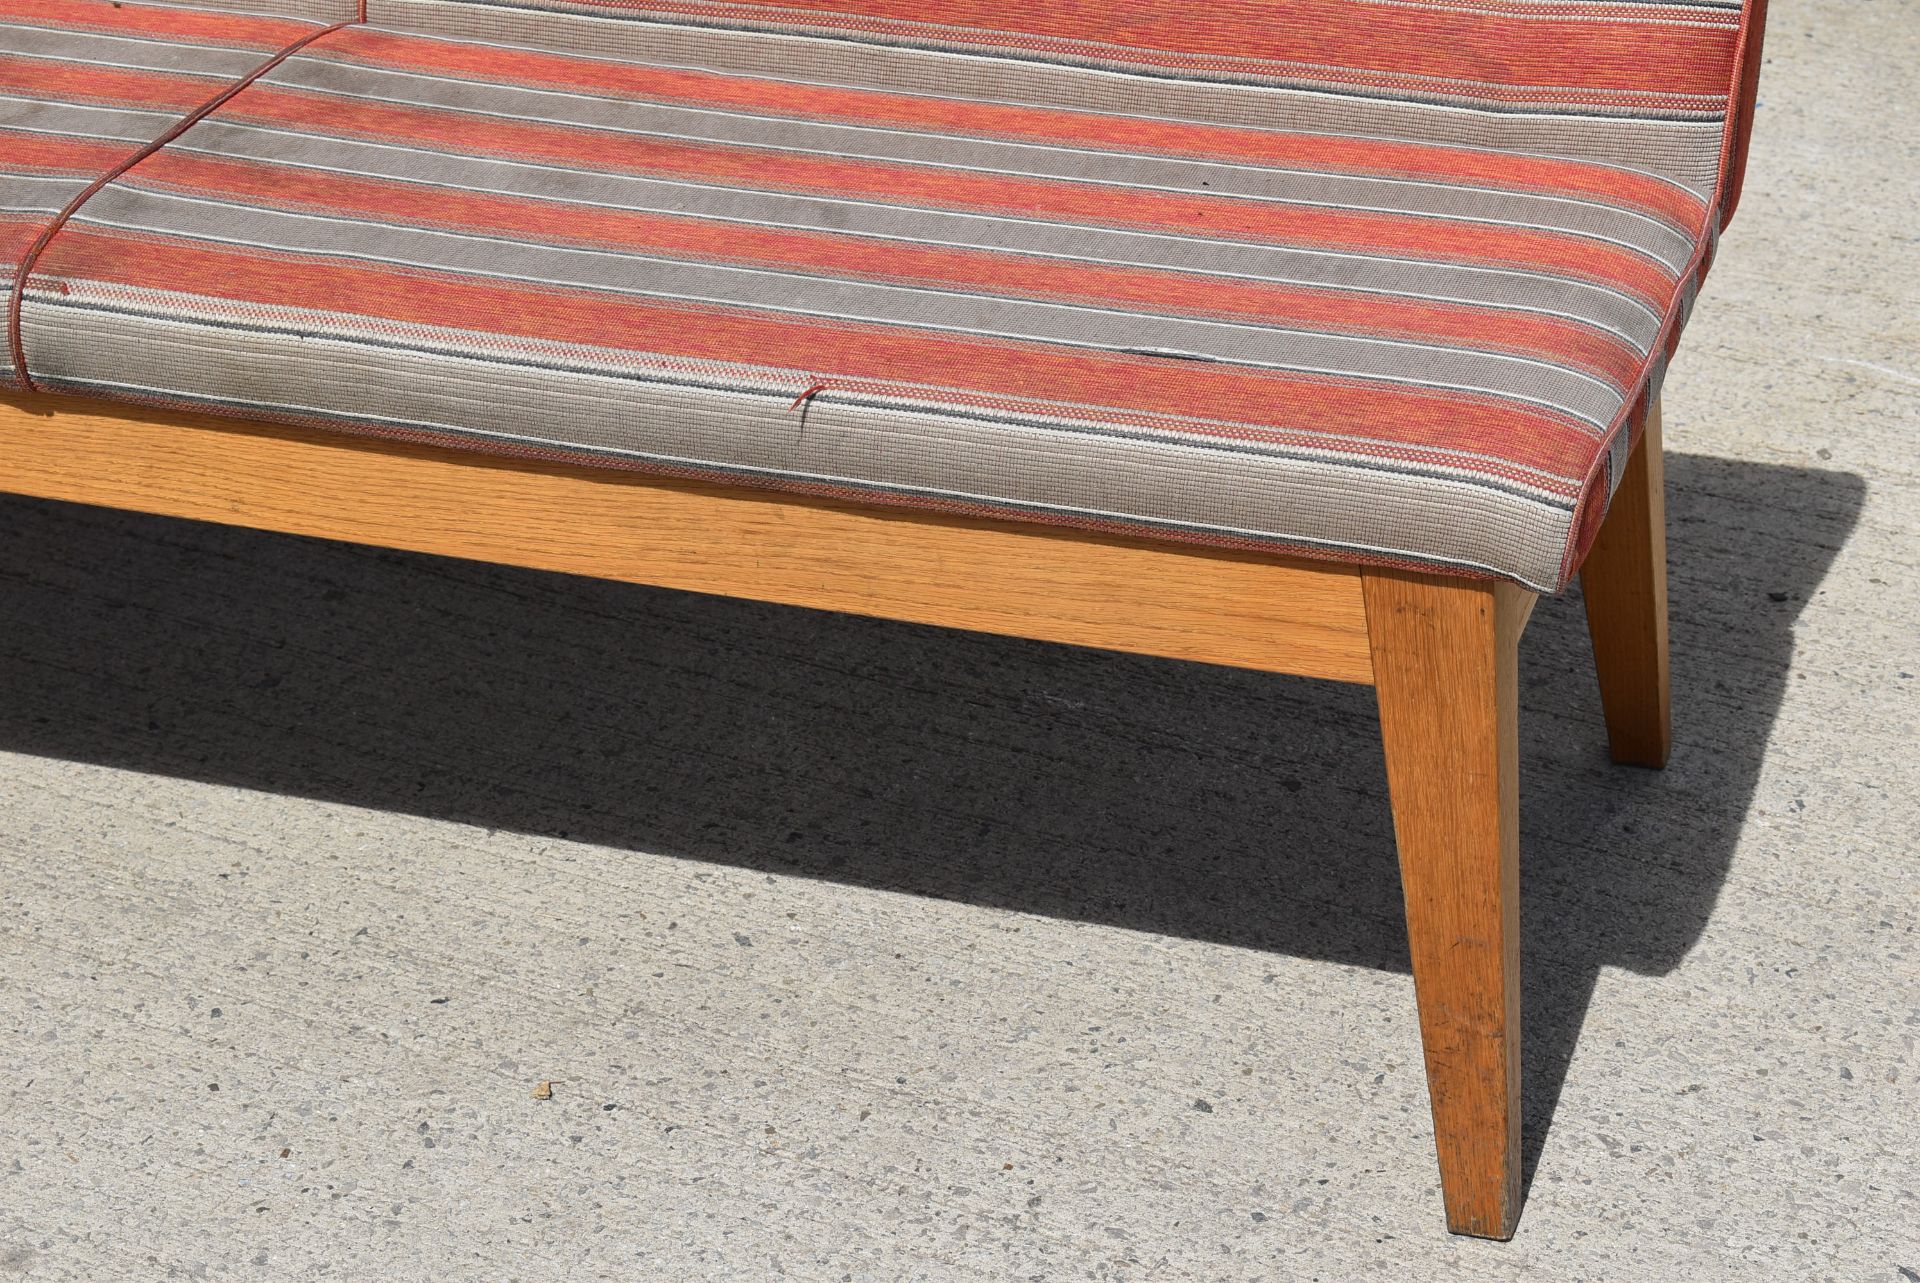 1 x Seating Bench With Solid Wood Bases and Hard Wearing Fabric Seats - Dimensions: H x W x D - Image 5 of 7